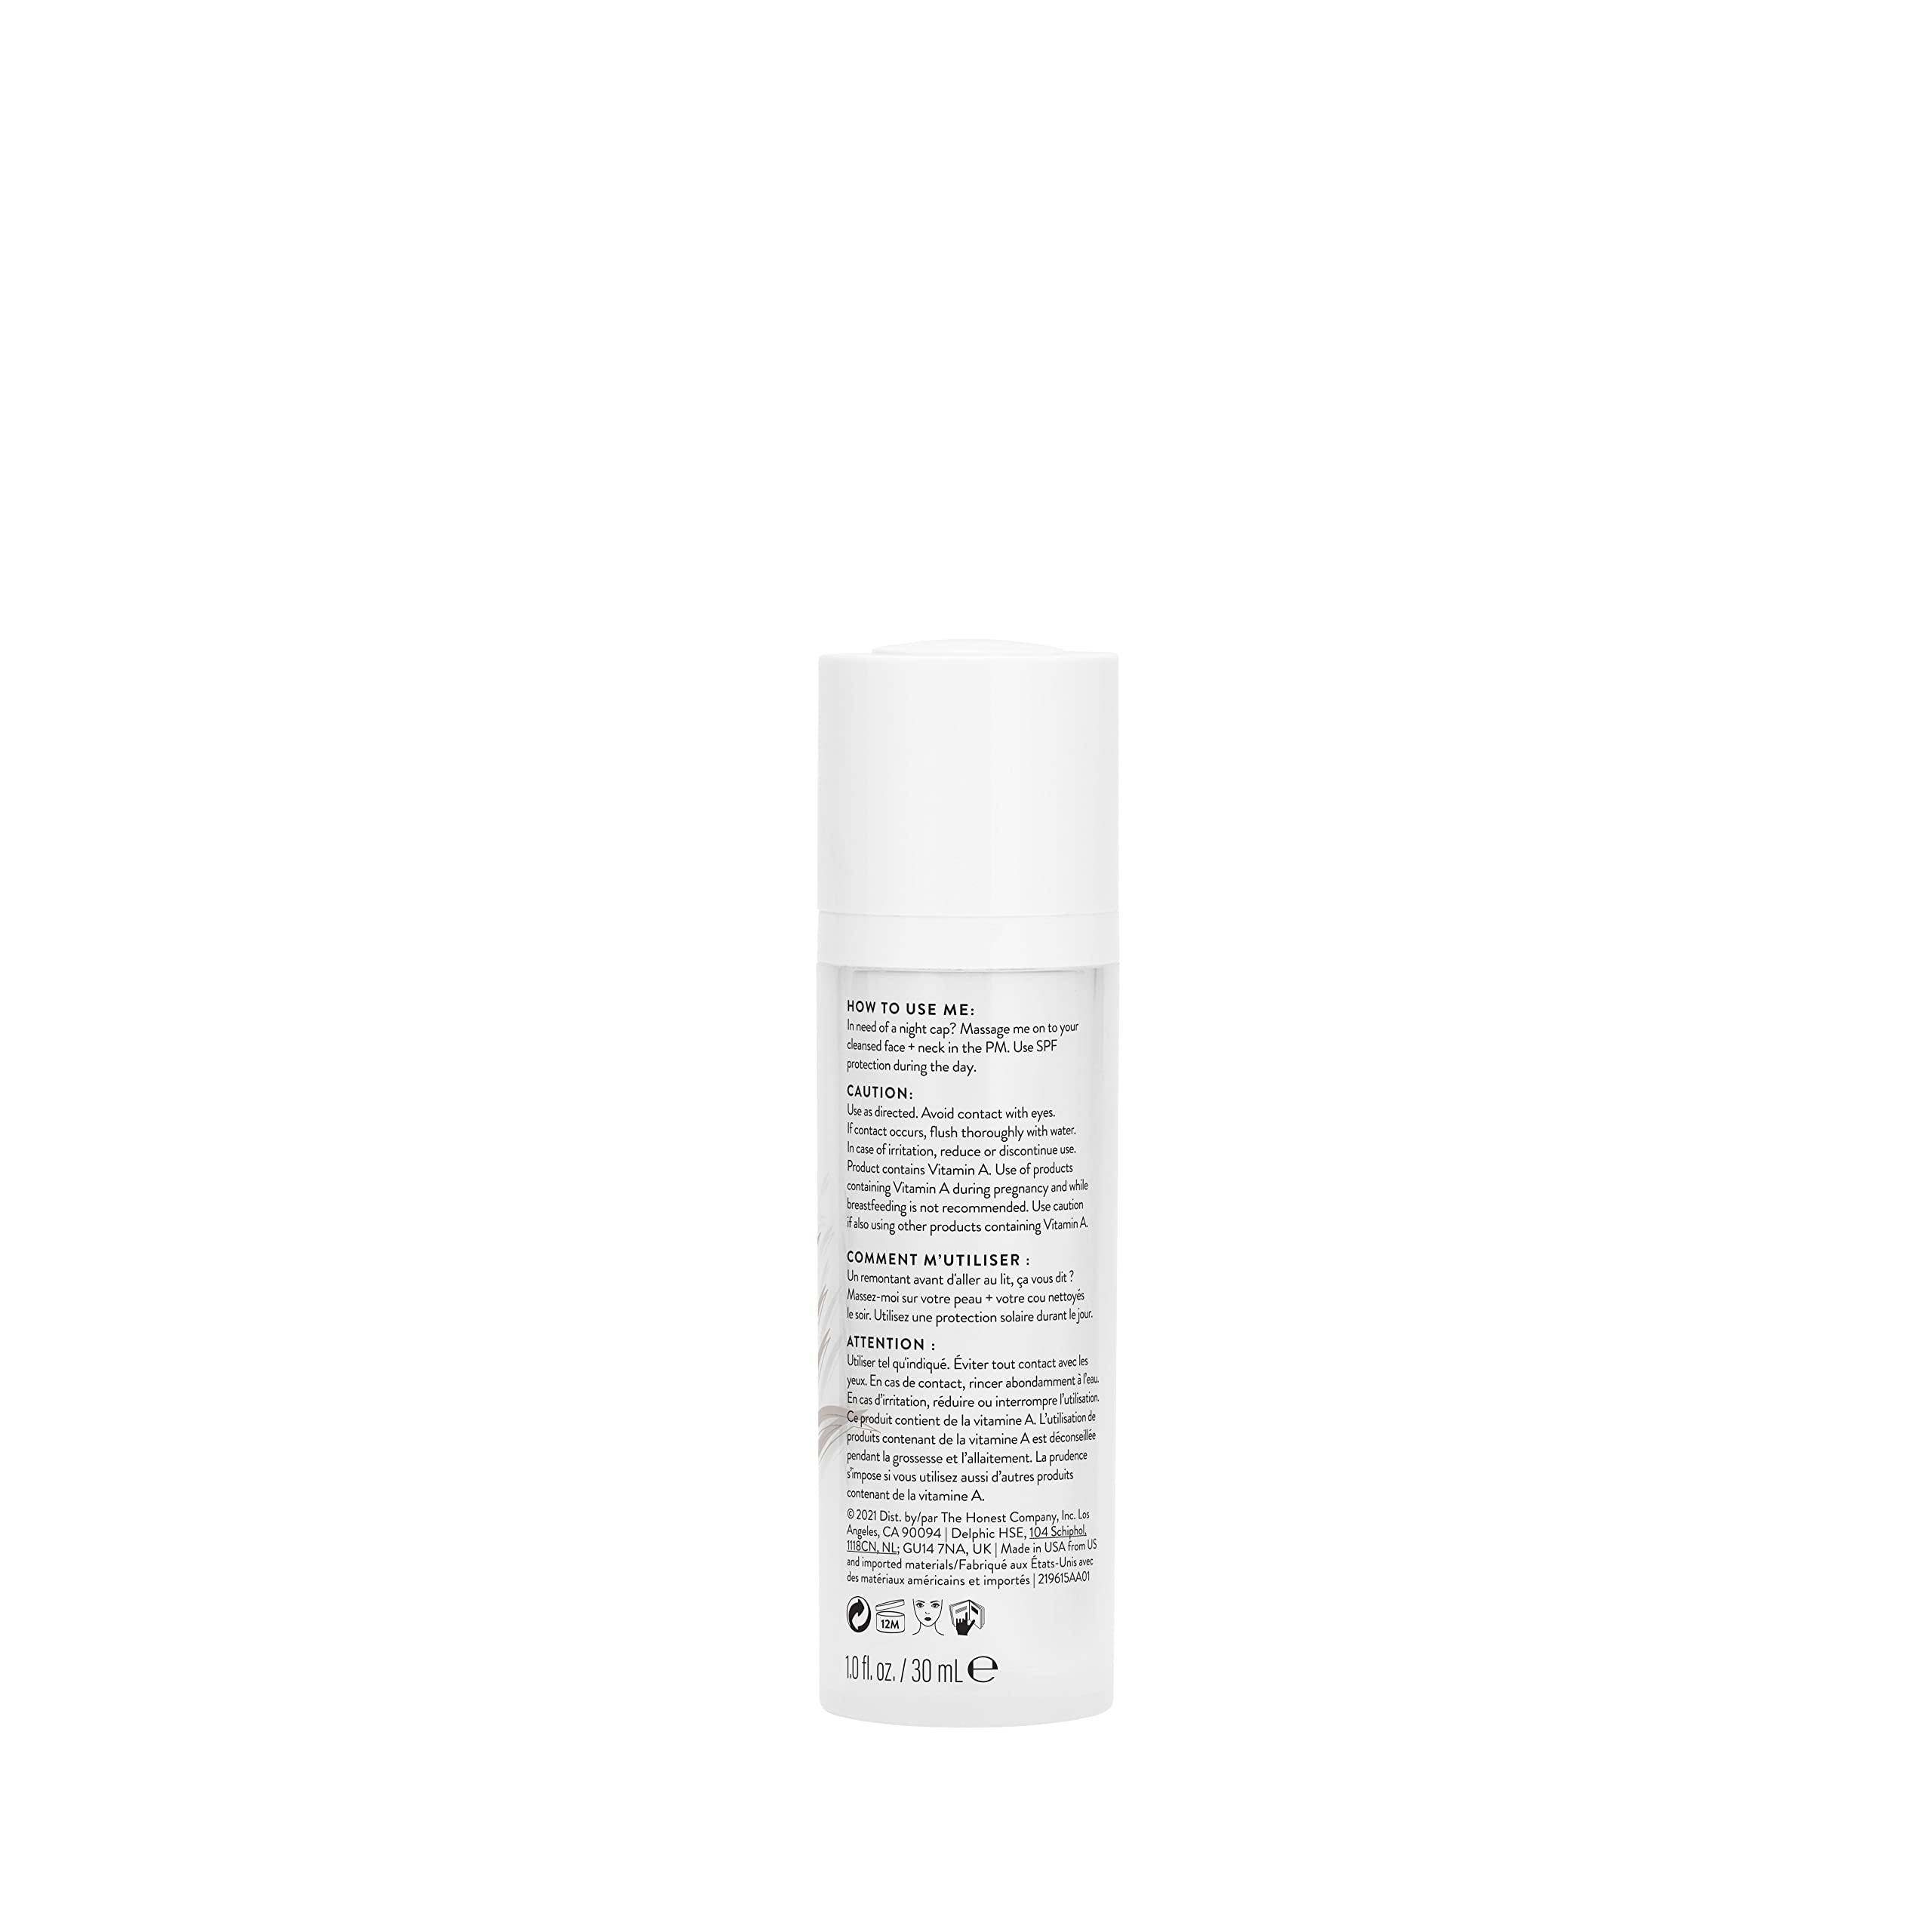 Honest Beauty Honestly Pure Retinyl Serum with Retinyl Linoleat to help reduce the appearance of fine lines + wrinkles | Dermatologist Tested | Vegan + Cruelty Free | 1 Fl. Oz.